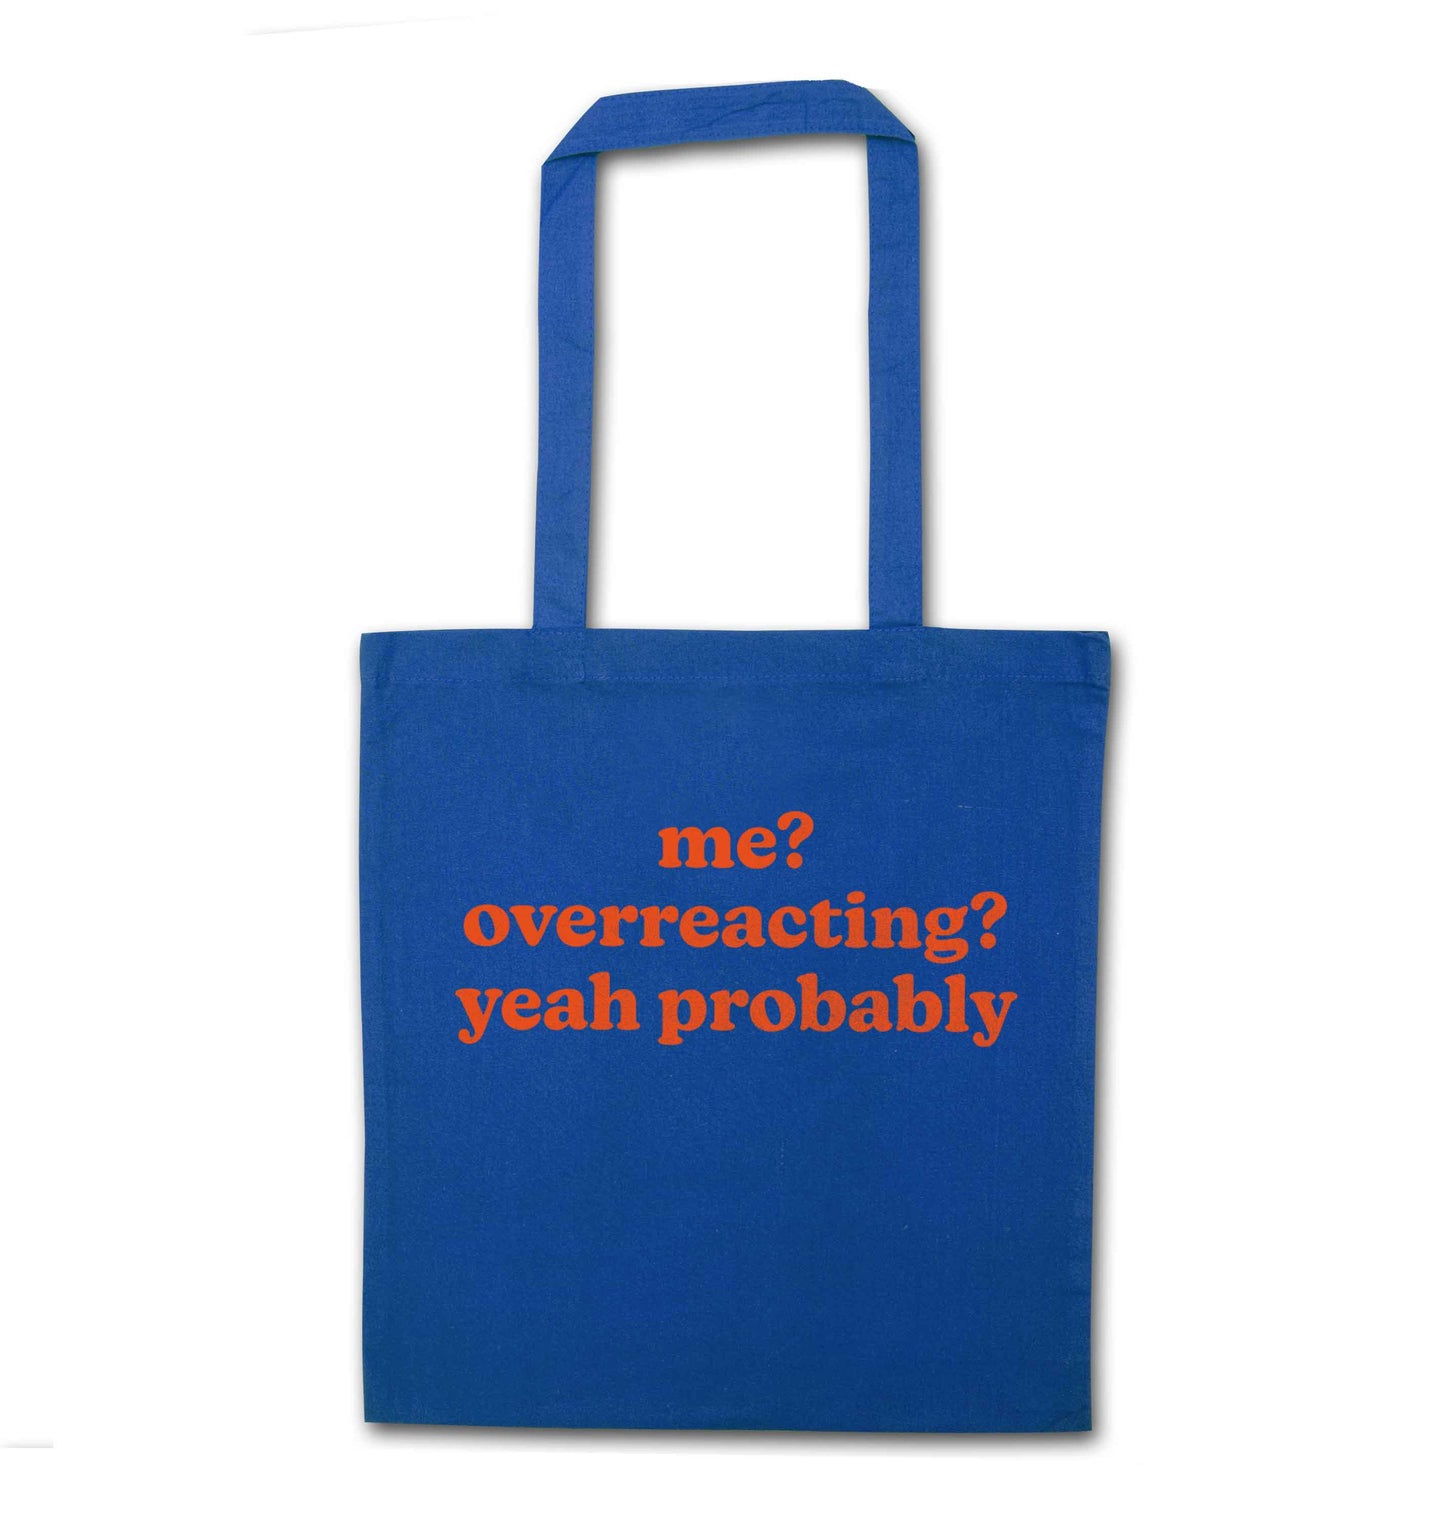 Me? Overreacting? Yeah probably blue tote bag